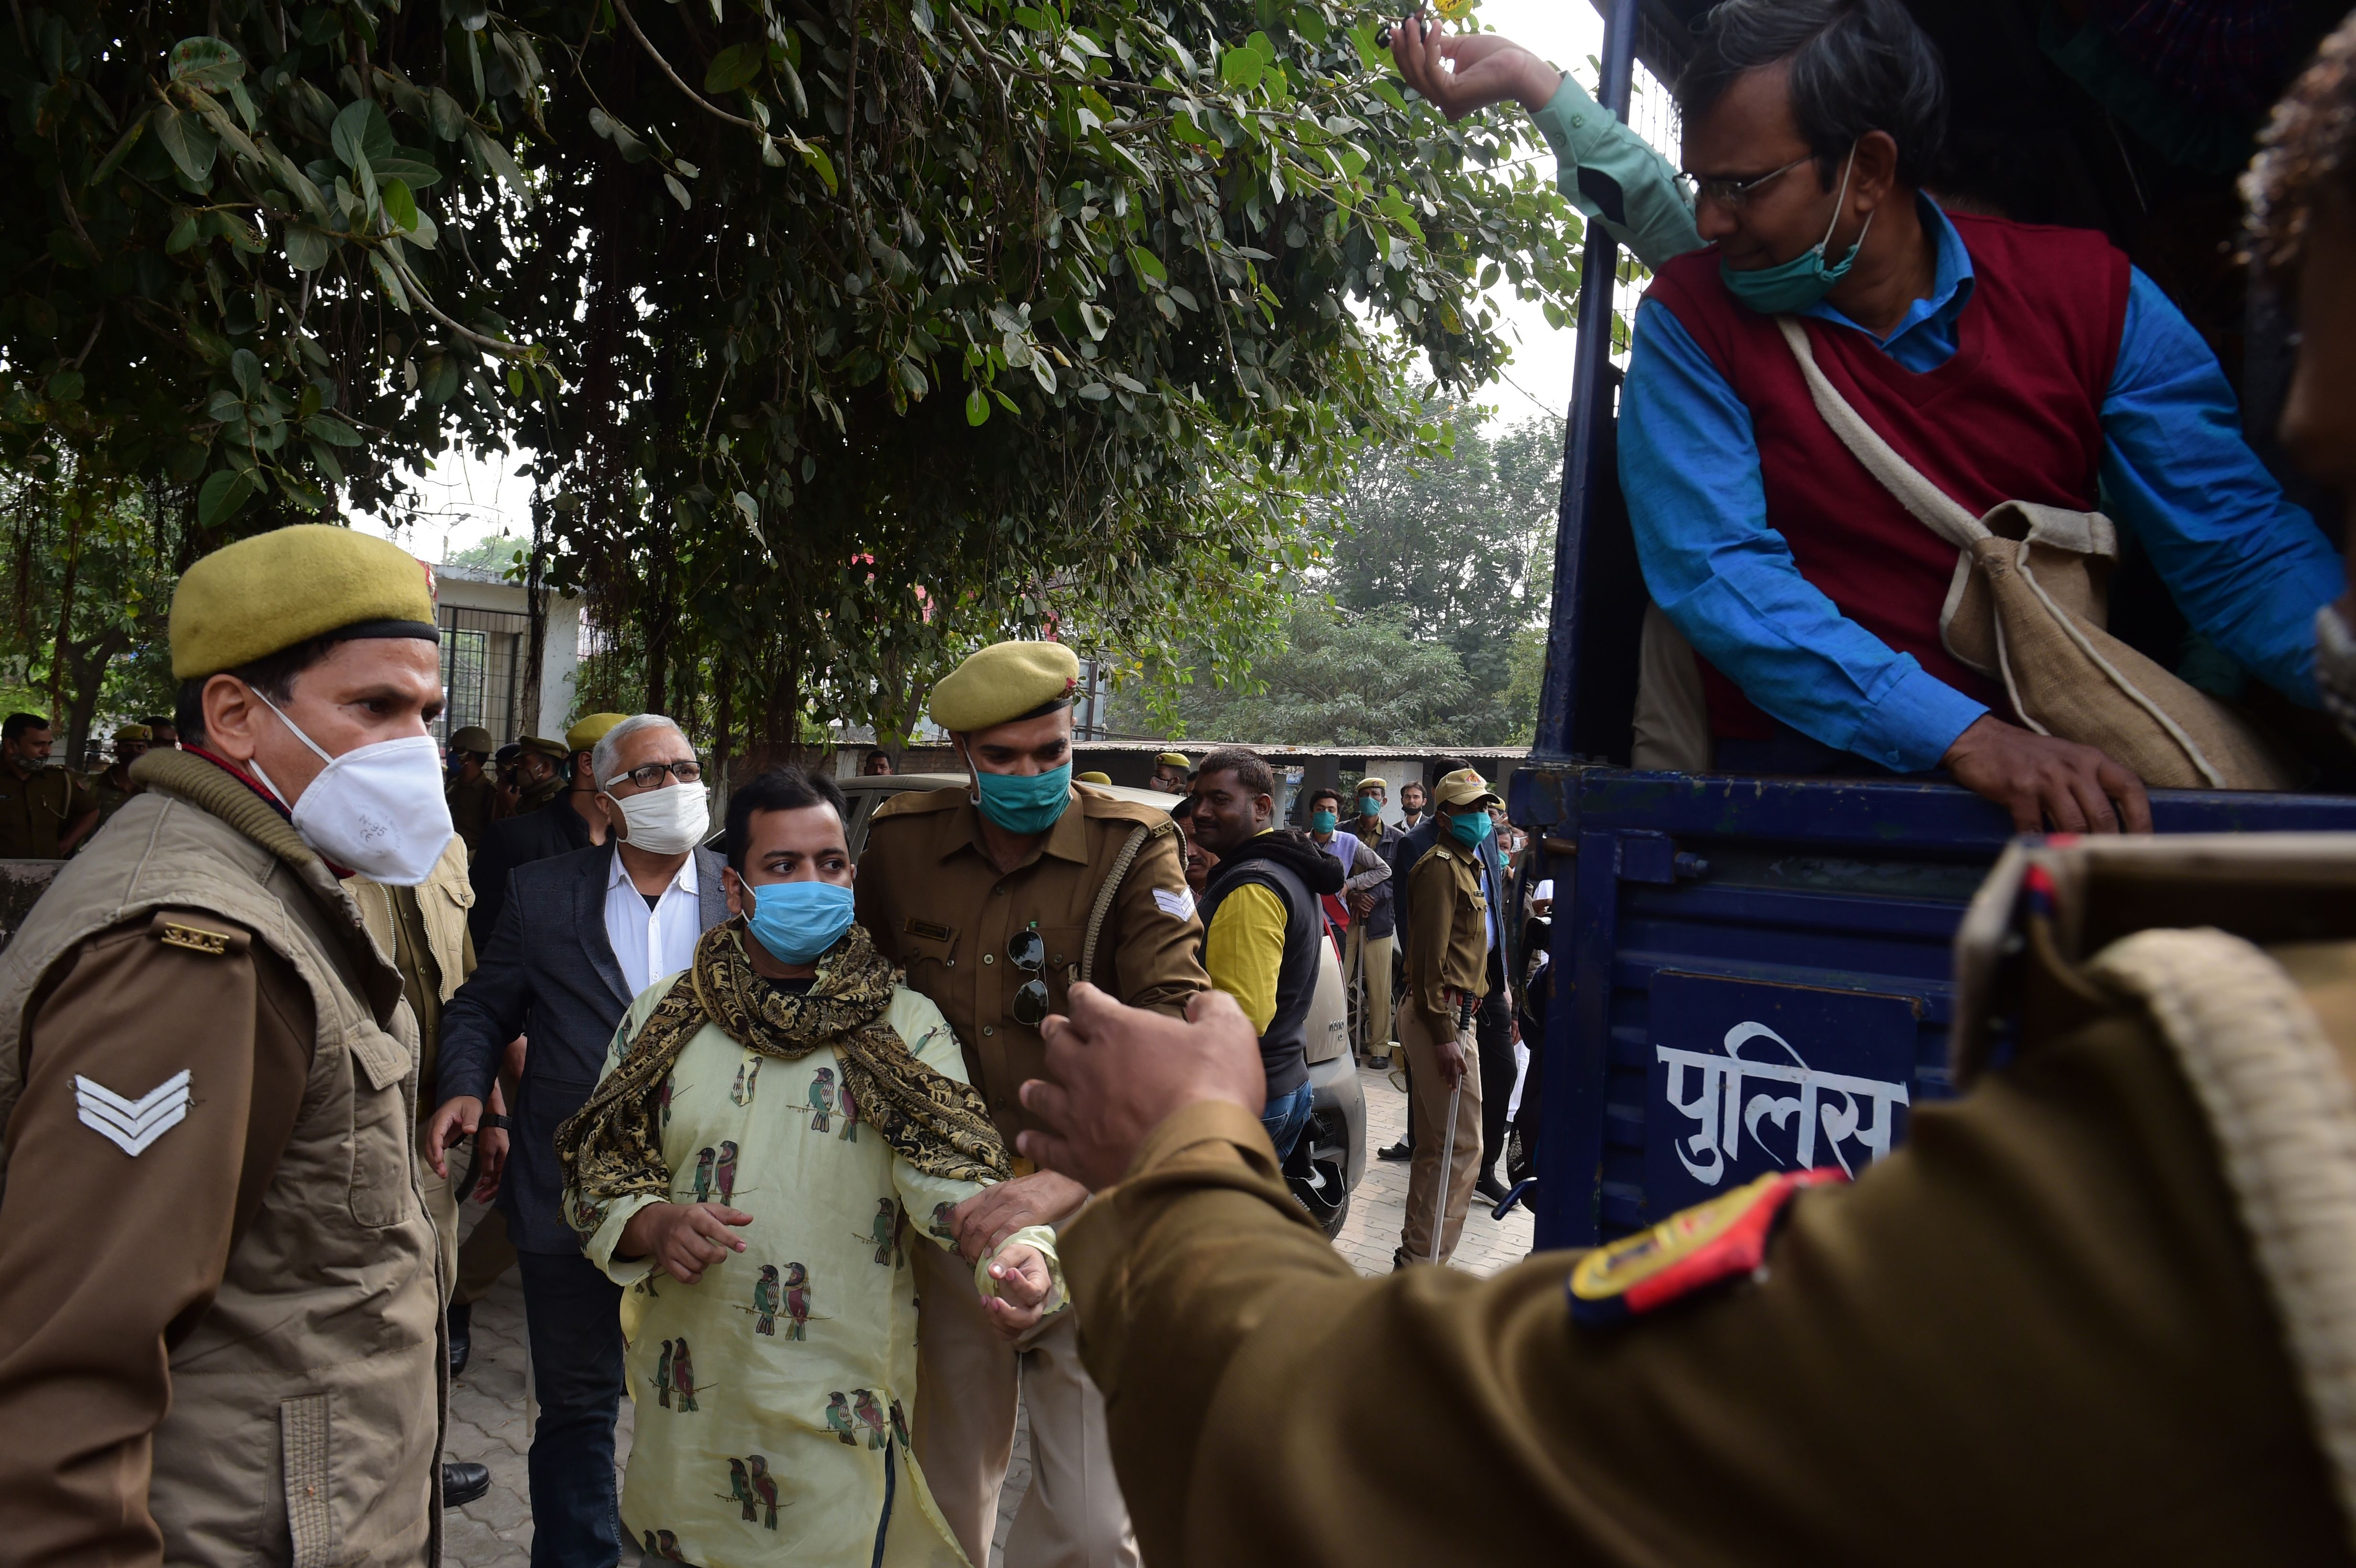 File image: Police detain students during a demonstration to protest against the recent agricultural reforms in Allahabad on 14 December 2020